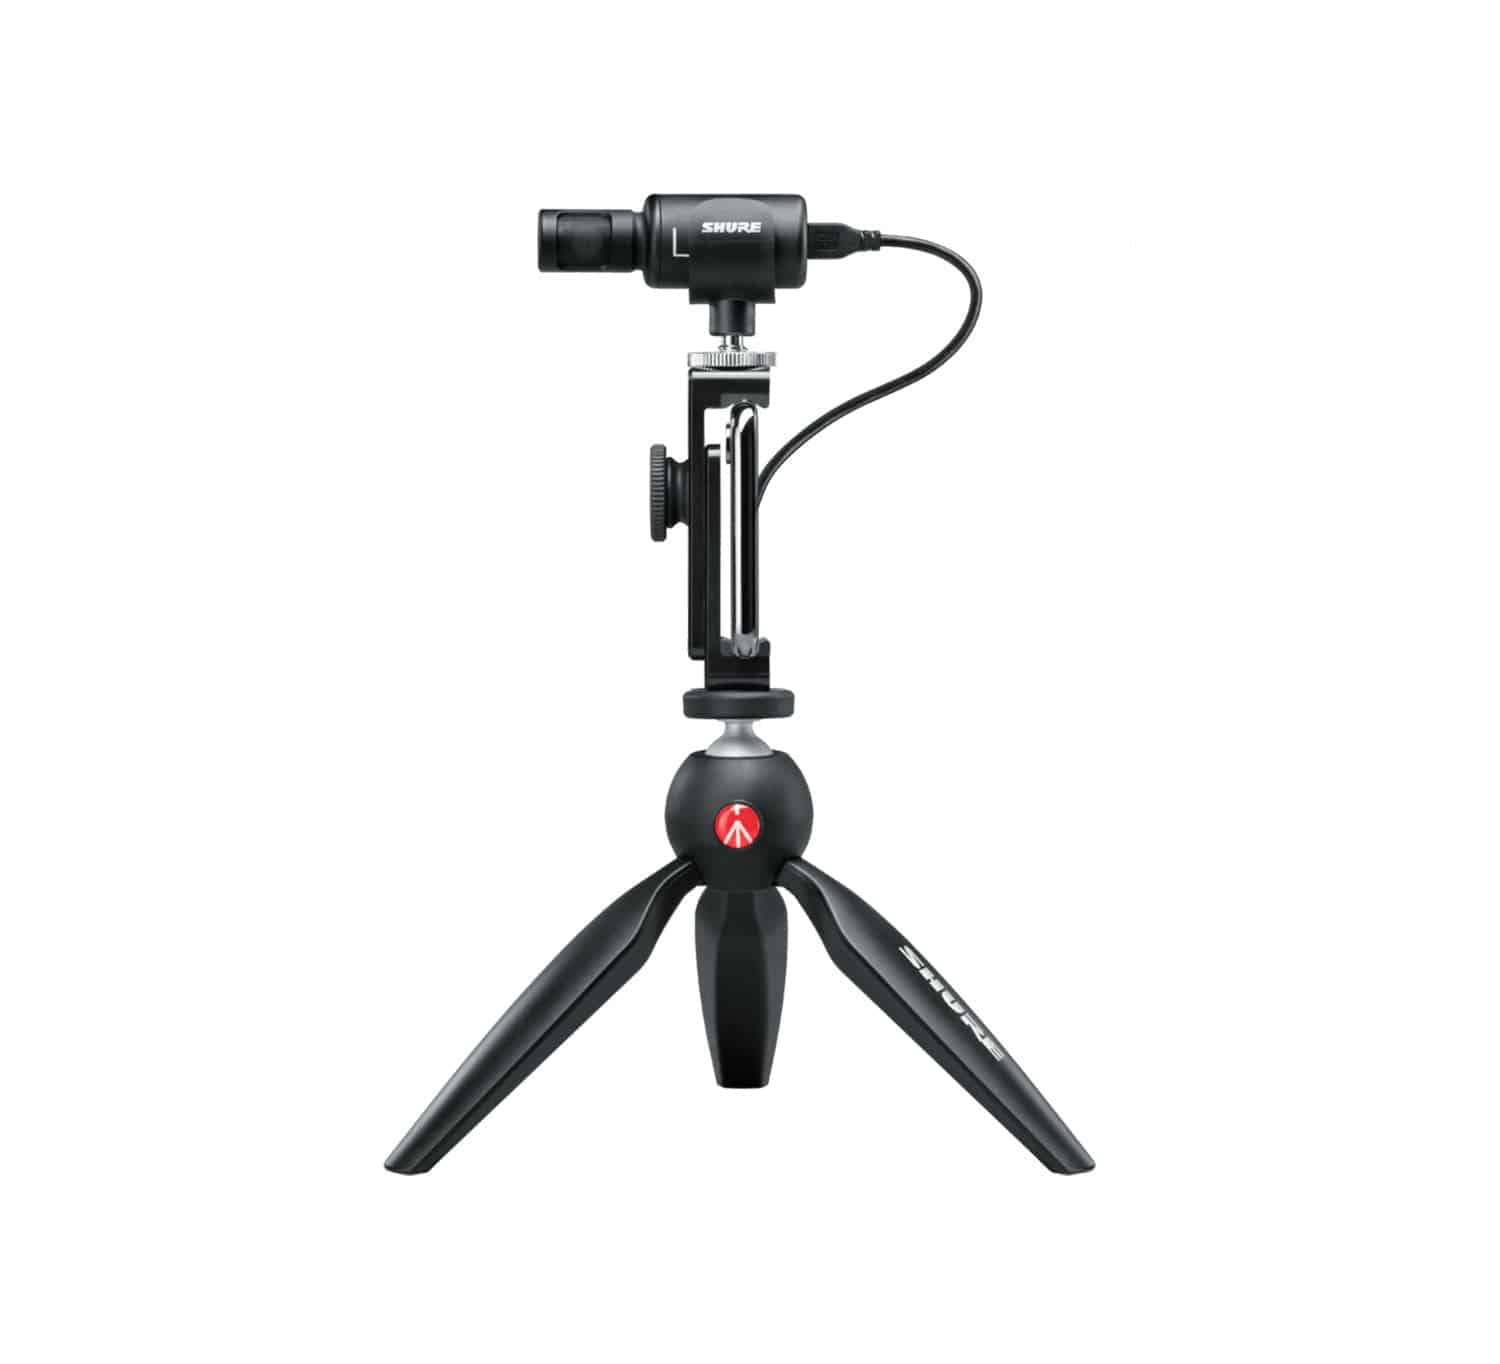 Shure MV88+ Video Kit Digital Stereo Condenser Microphone with Tripod - Hollywood DJ